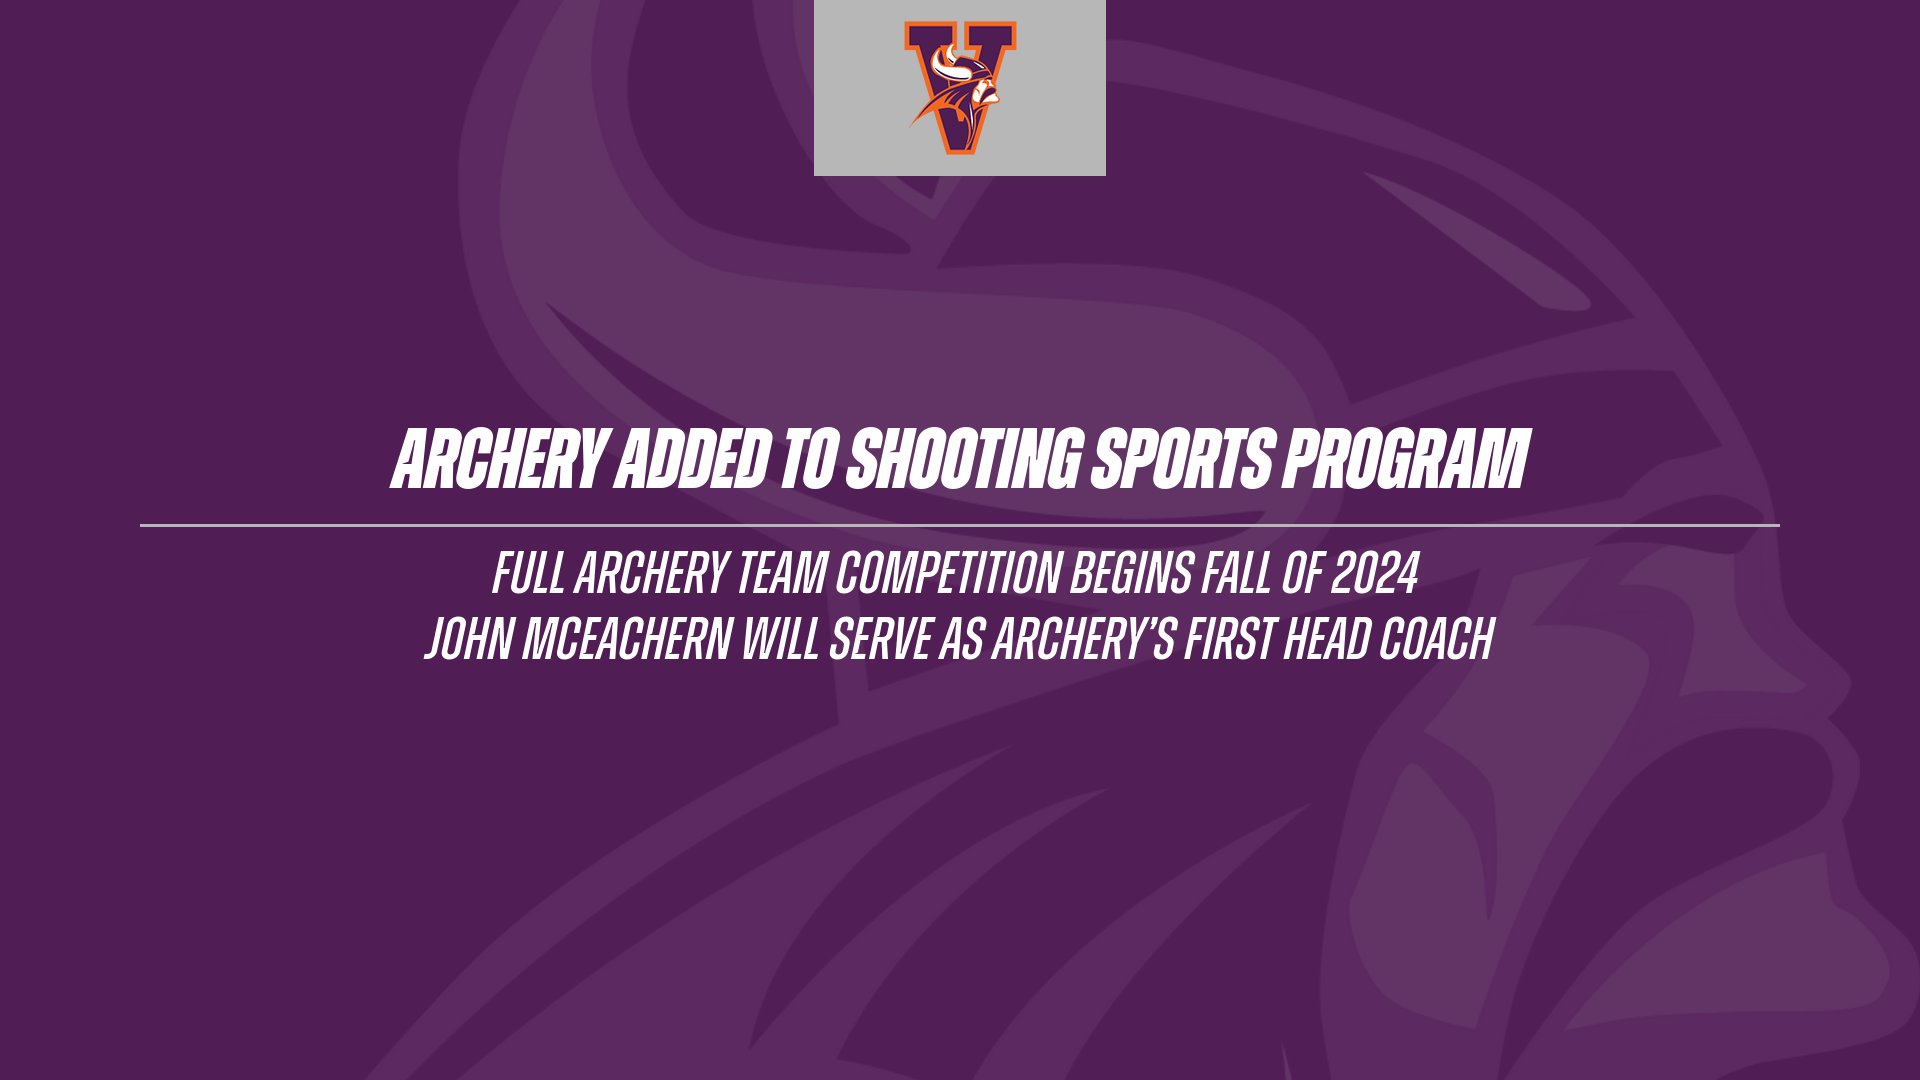 Archery Added as New Athletic Program for Fall of 2024